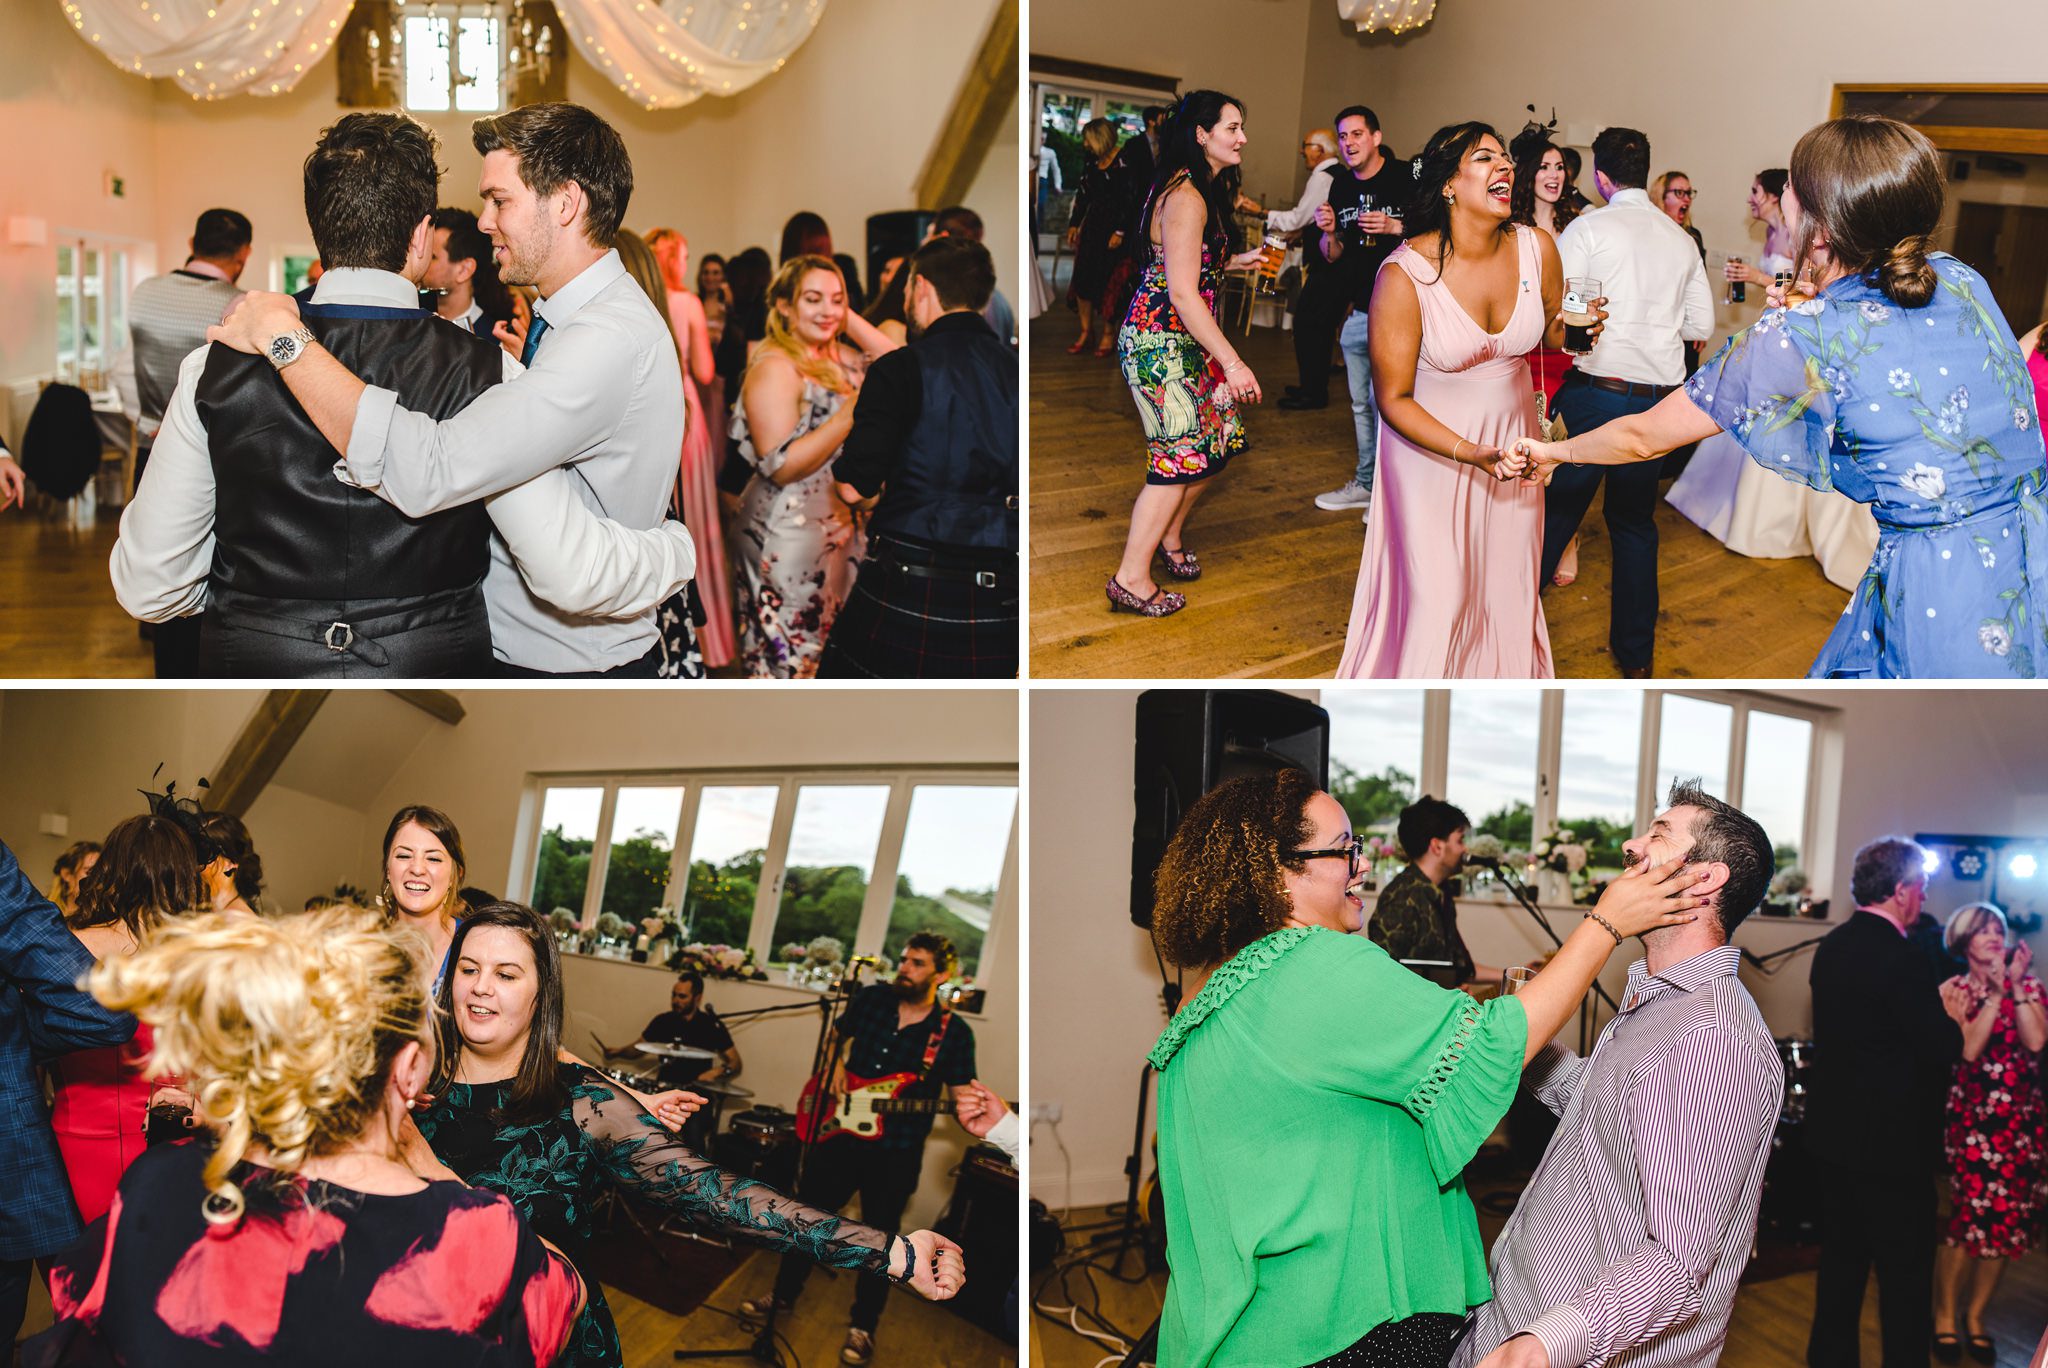 Dancing at a Hyde House wedding